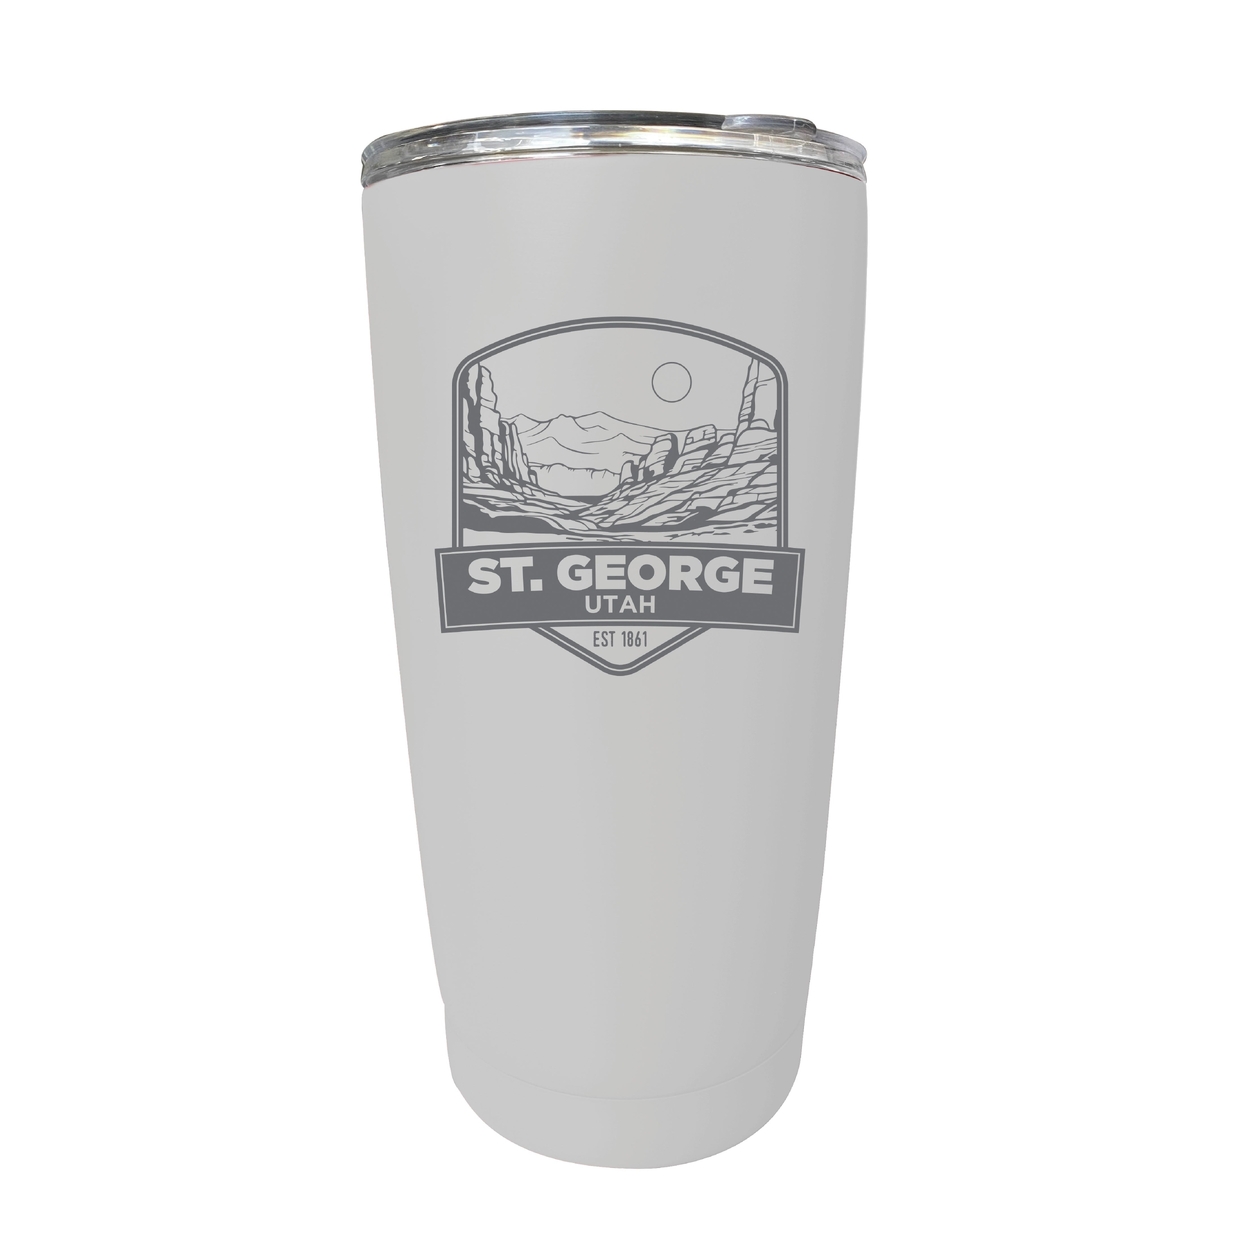 St. George Utah Souvenir 16 Oz Engraved Stainless Steel Insulated Tumbler - White,,Single Unit